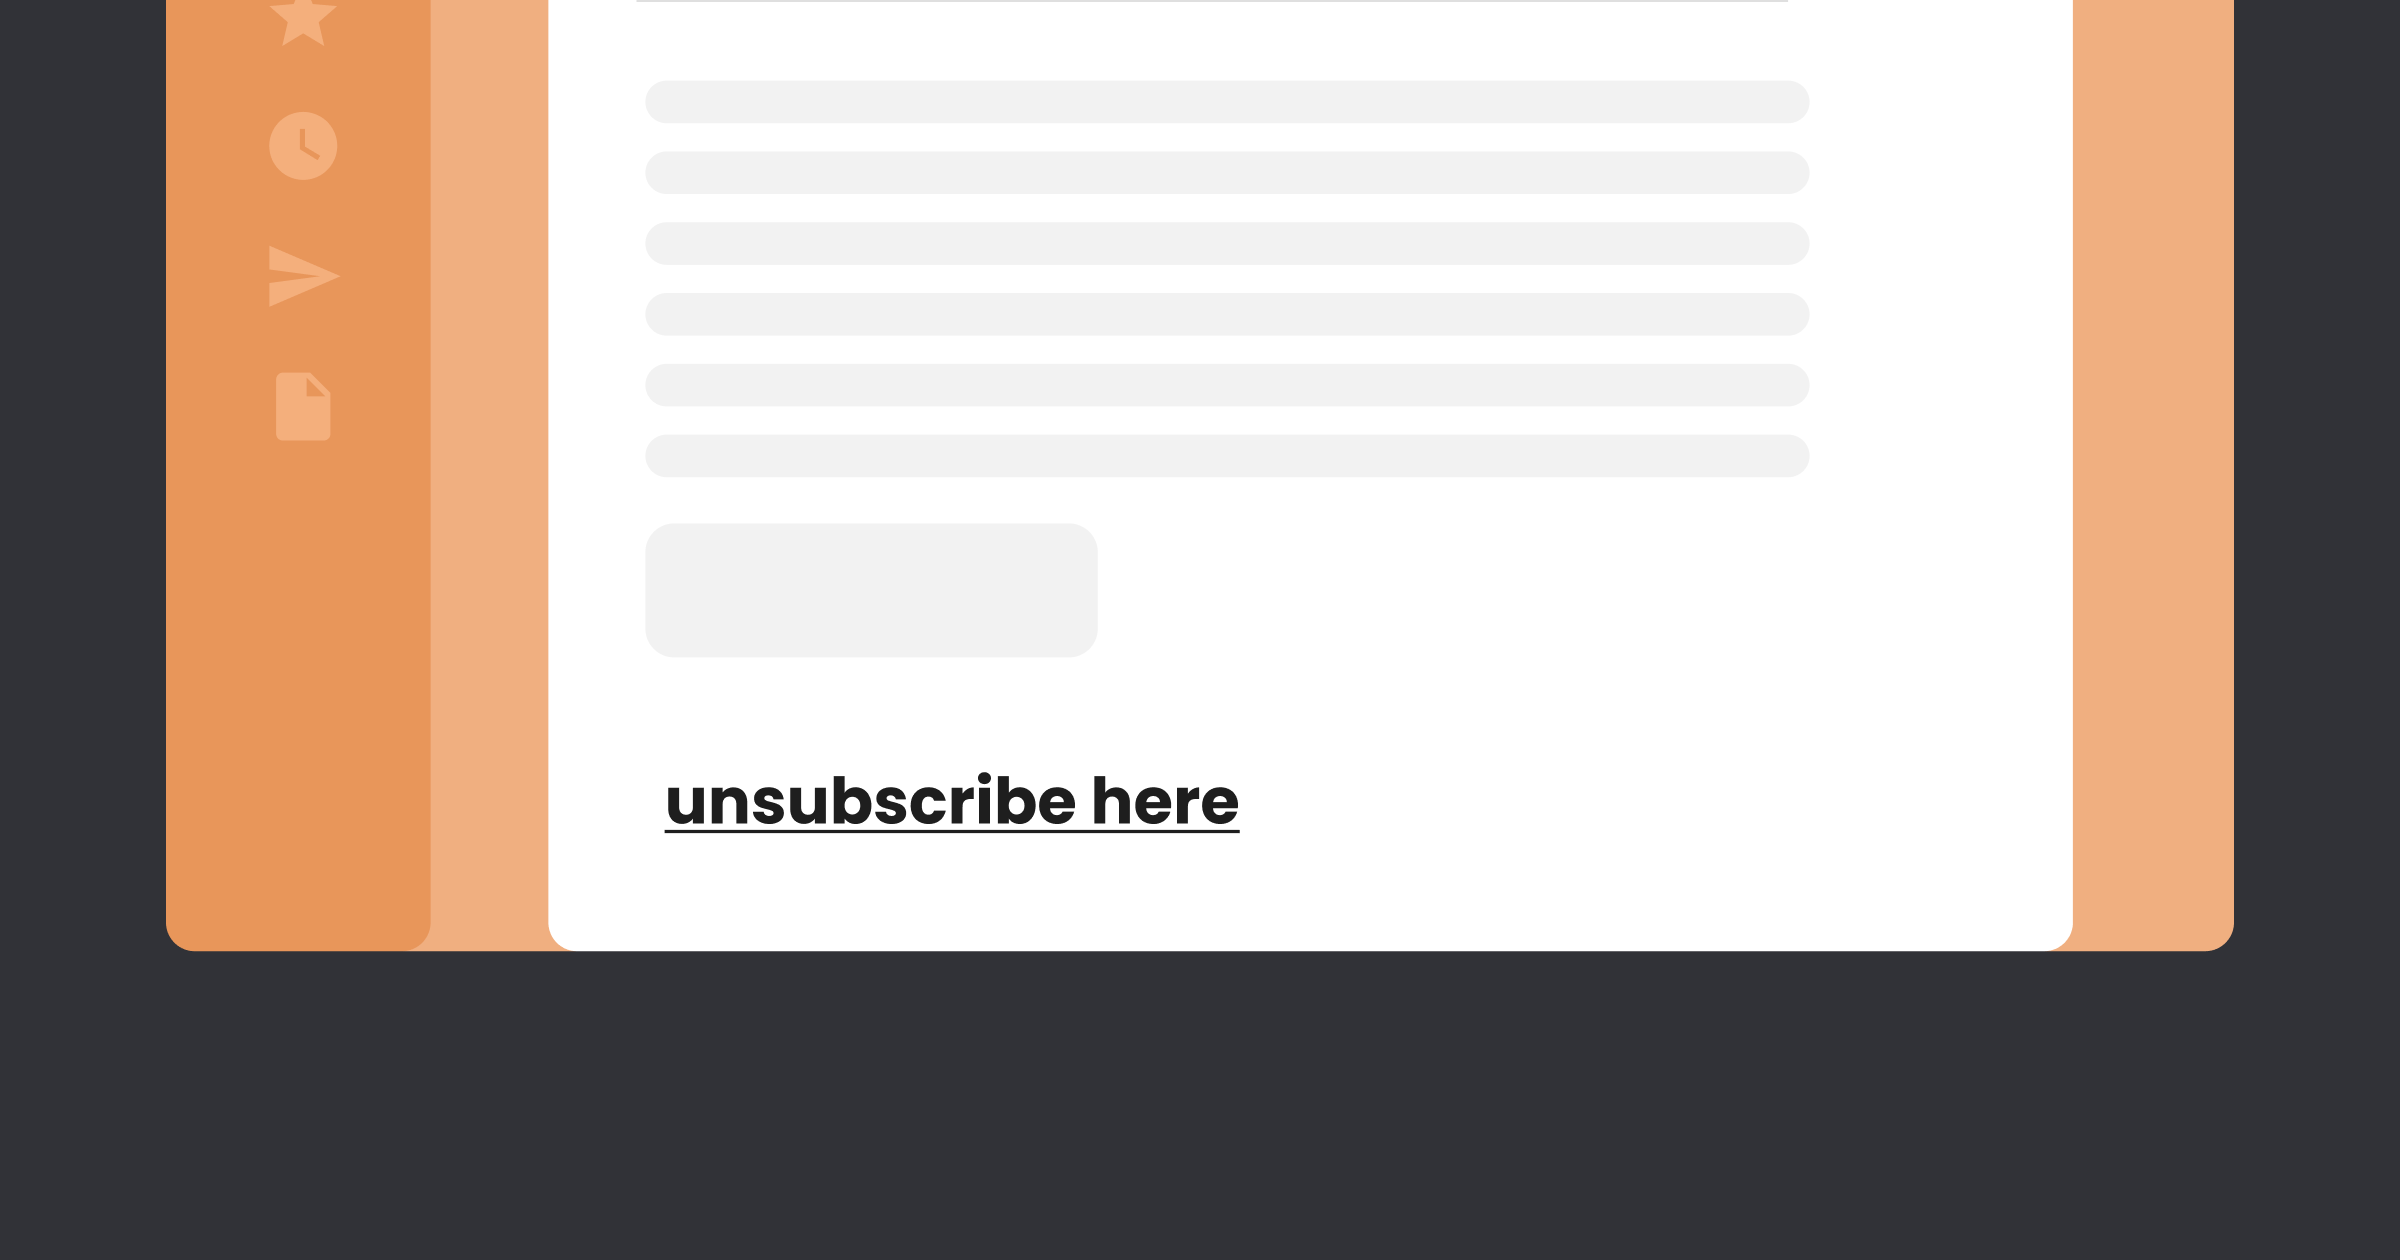 Strategy #10_ Provide users with a clear unsubscribe option